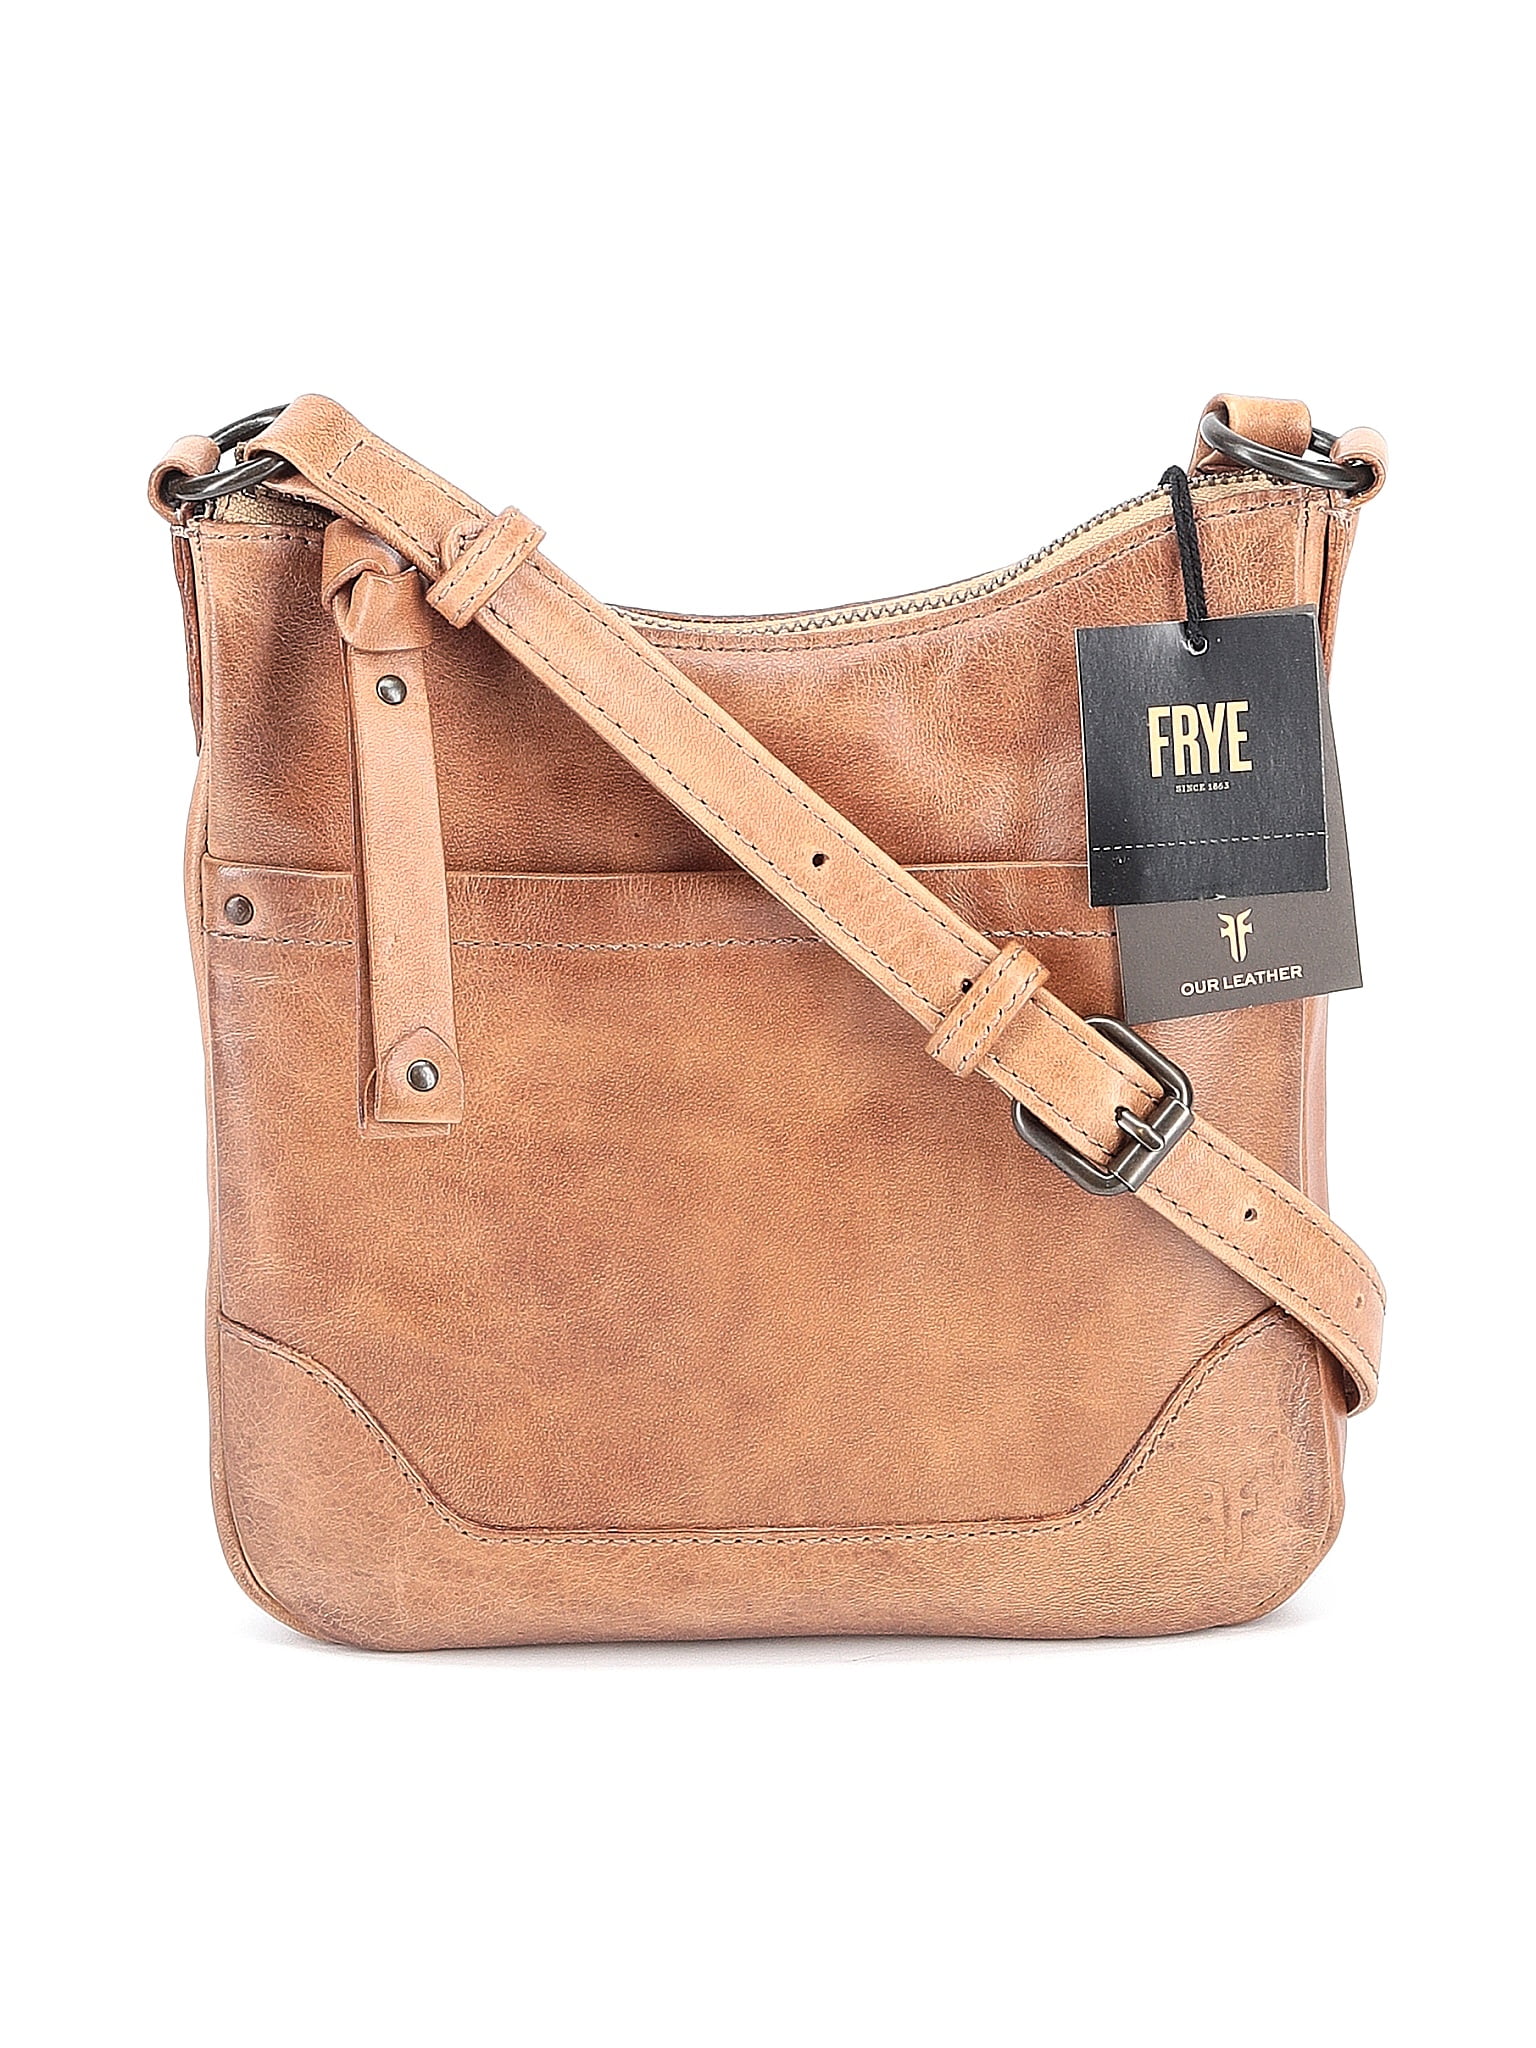 FRYE 100% Leather Brown Leather Crossbody Bag One Size 56% off thredUP